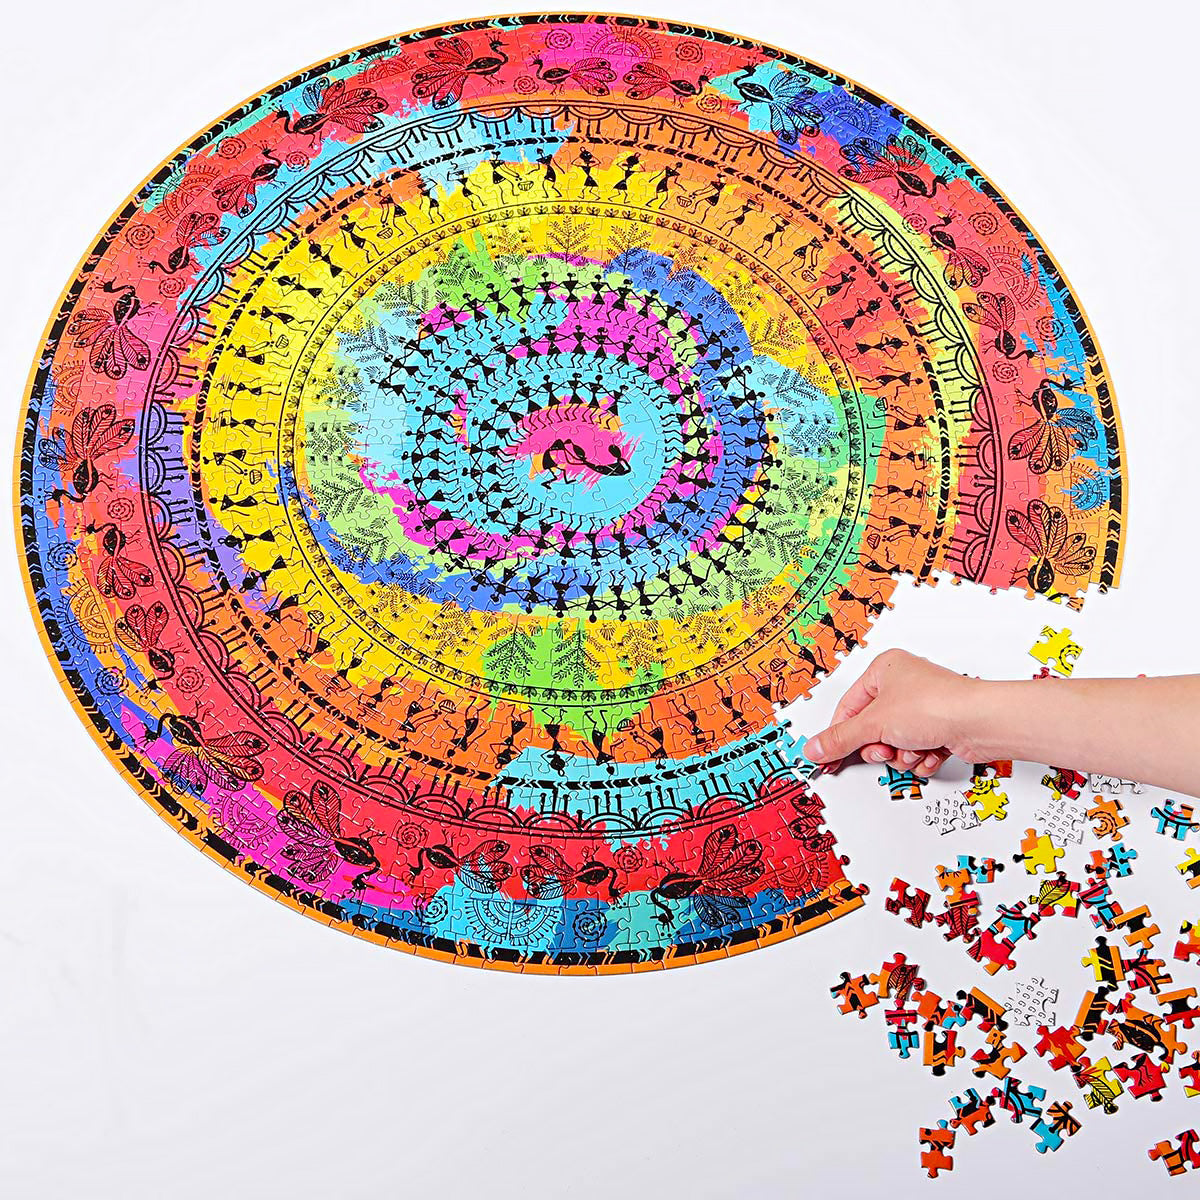 A colourful tribal jigsaw puzzle made of 1,000 pieces for any art lover who has been looking for a way to creatively spend their time without having to pick up a paint brush.